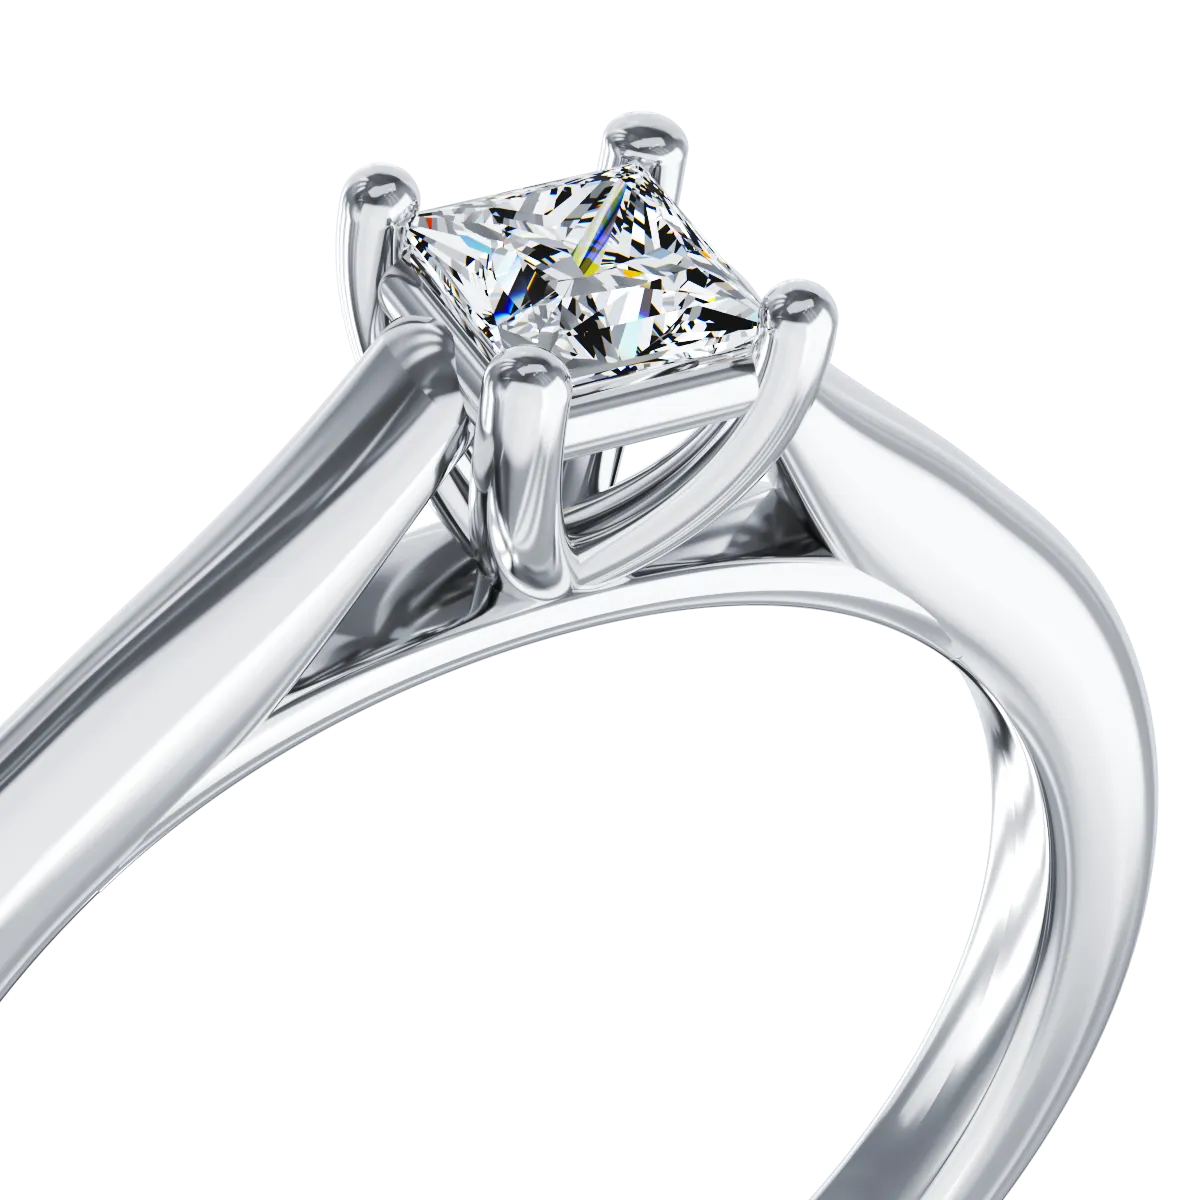 Platinum engagement ring with a 0.205ct solitaire diamond